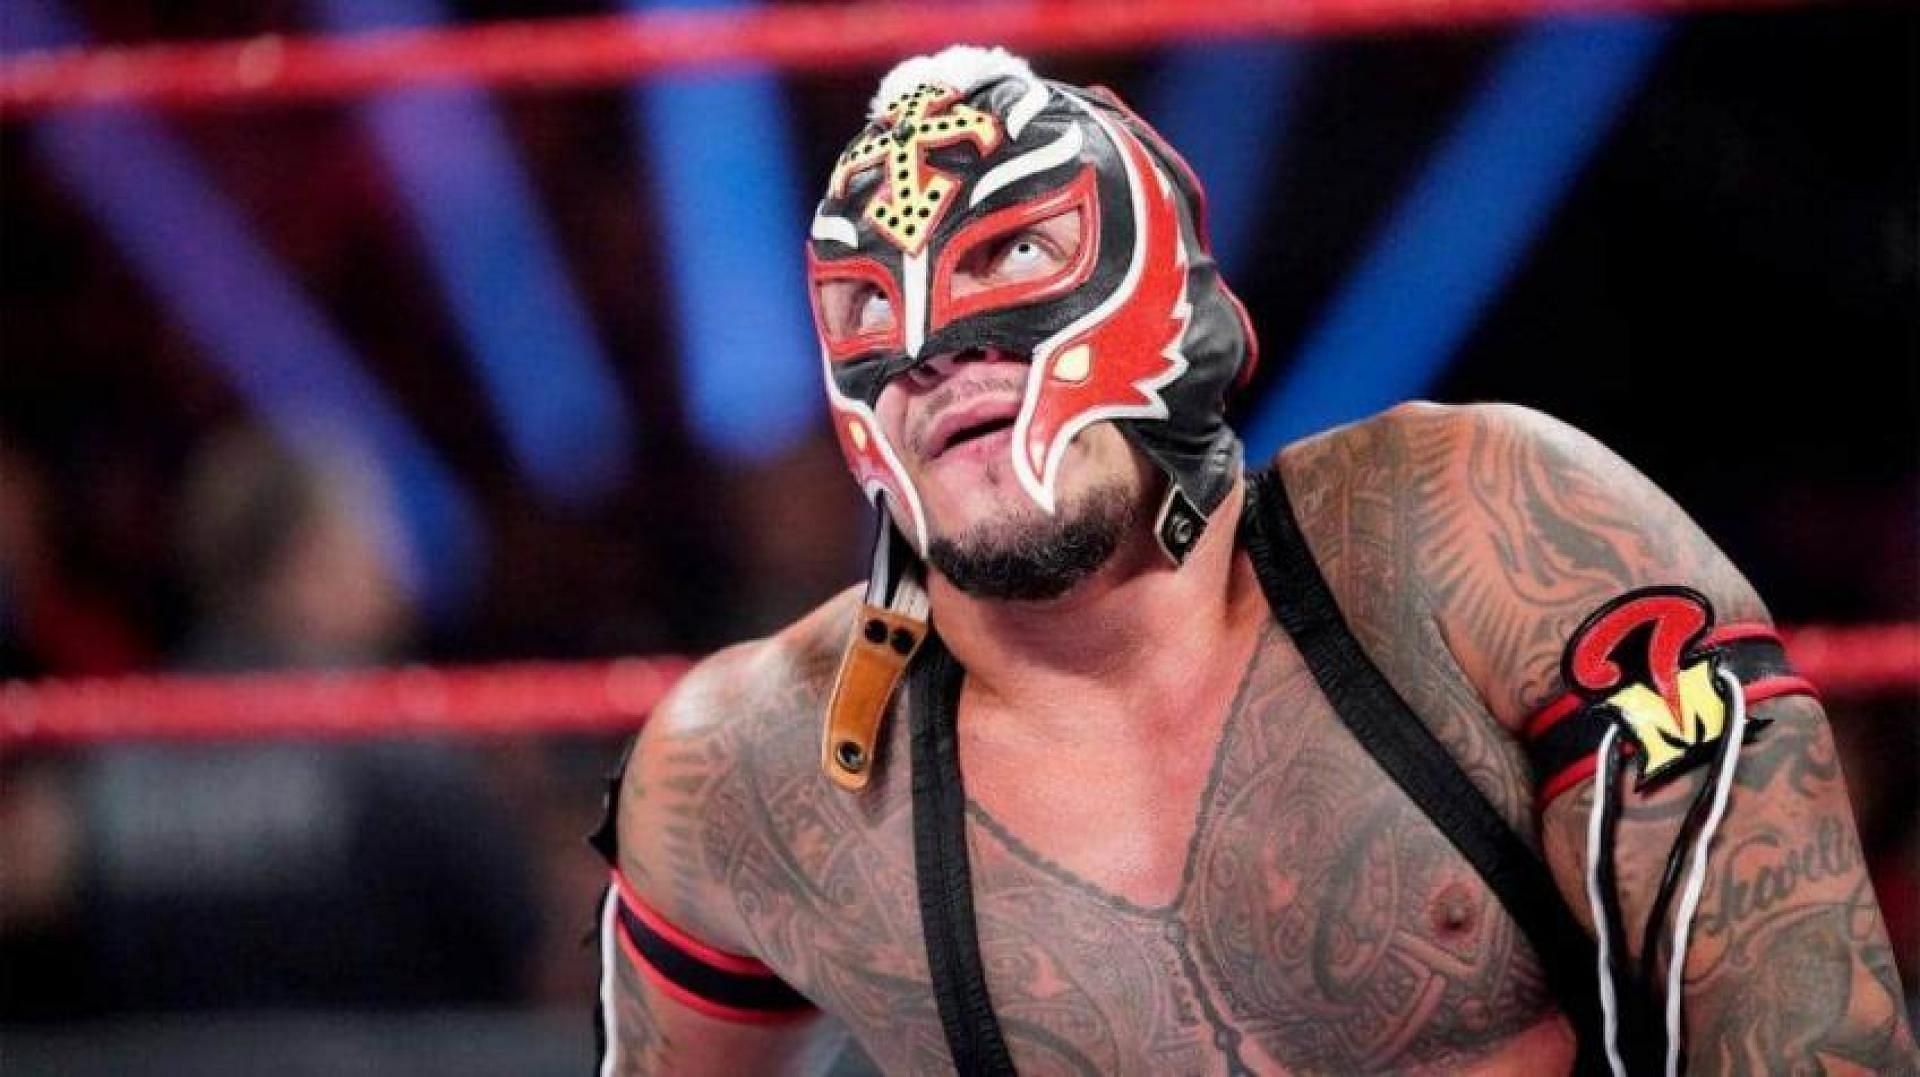 Rey Mysterio is heading to RAW in the 2021 WWE Draft.